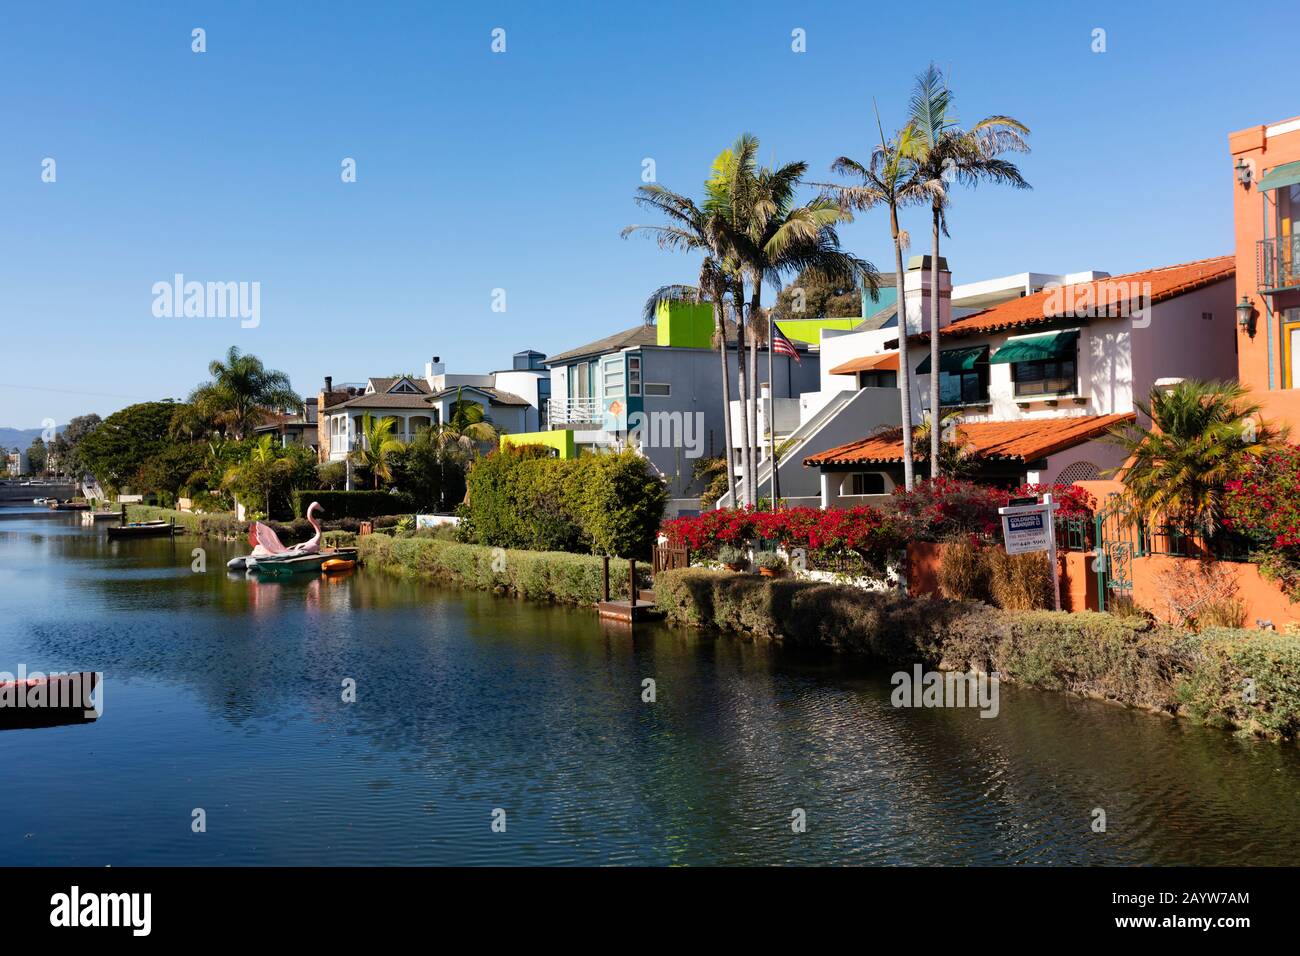 Luxury houses on Venice canals, Santa Monica, California, United States of america. USA. October 2019 Stock Photo